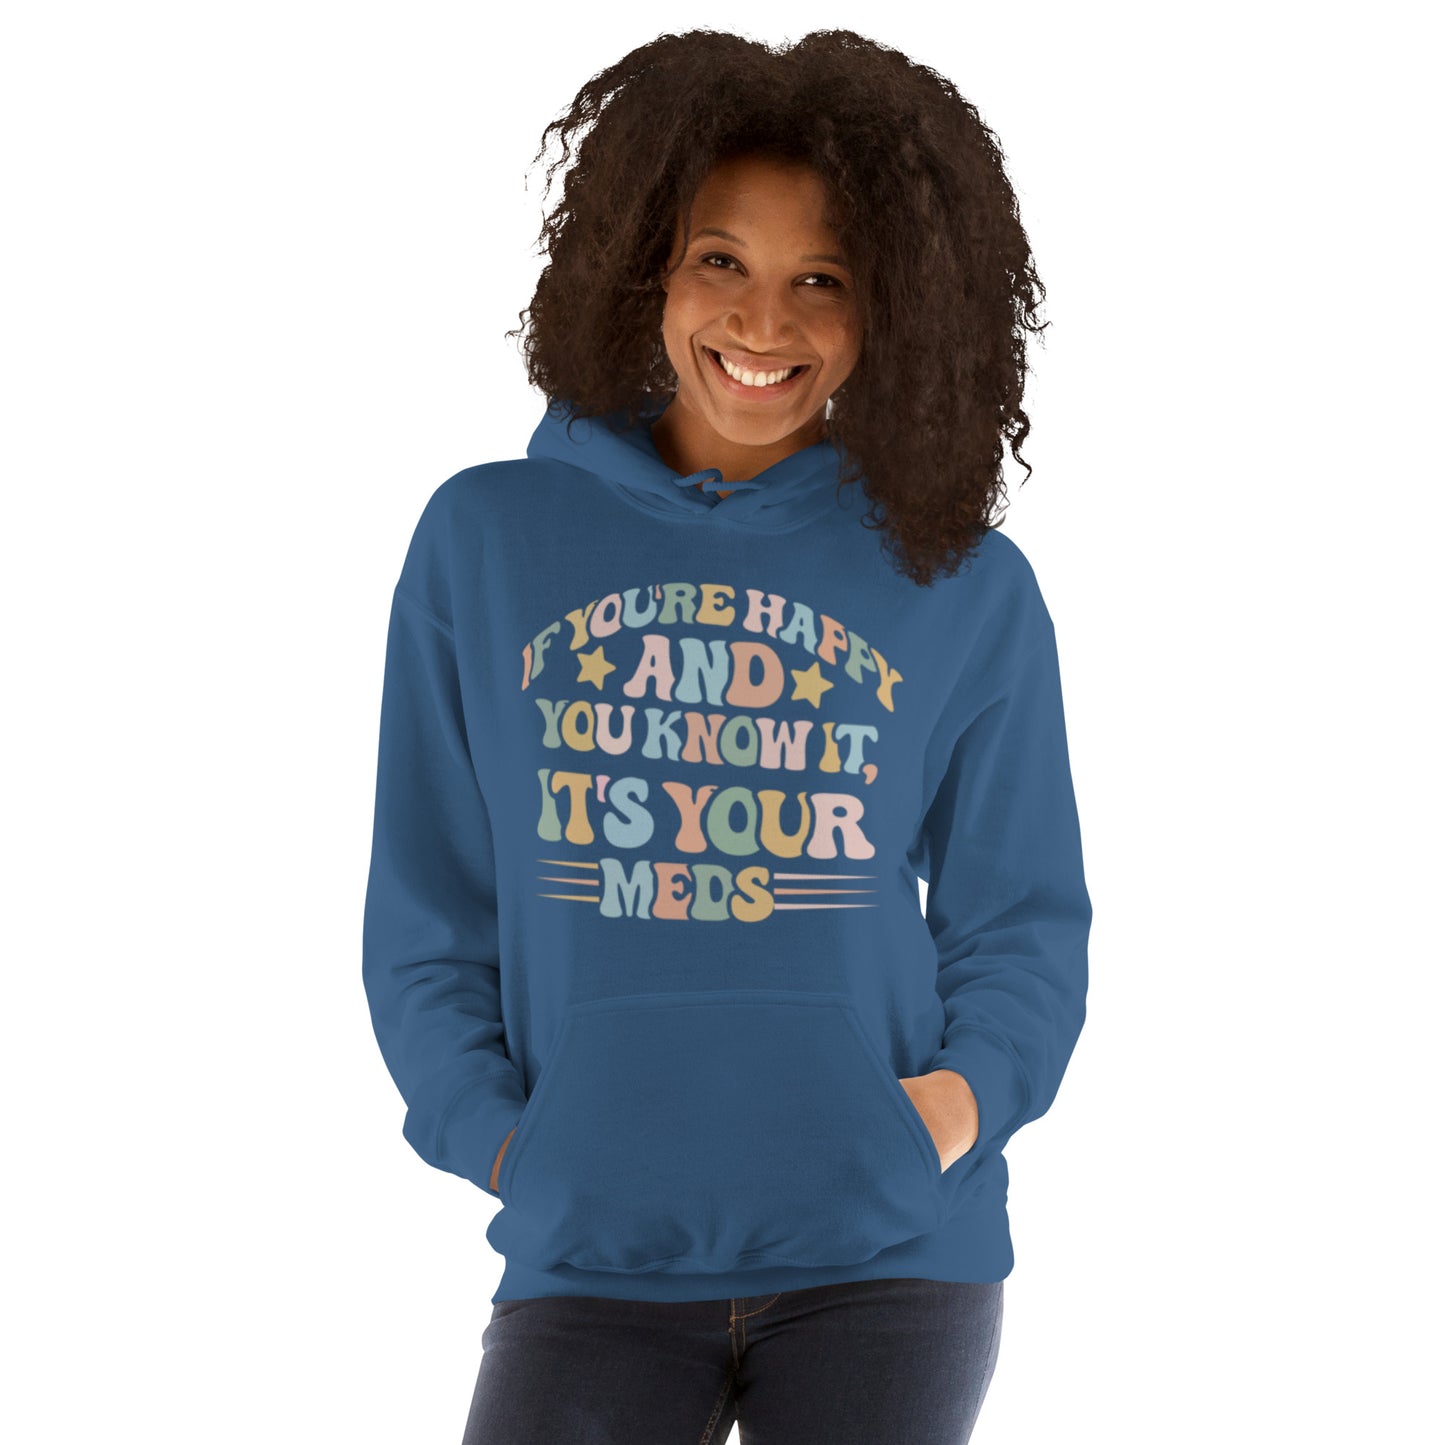 If You're Happy And You Know It, It's Your Meds Unisex Hoodie